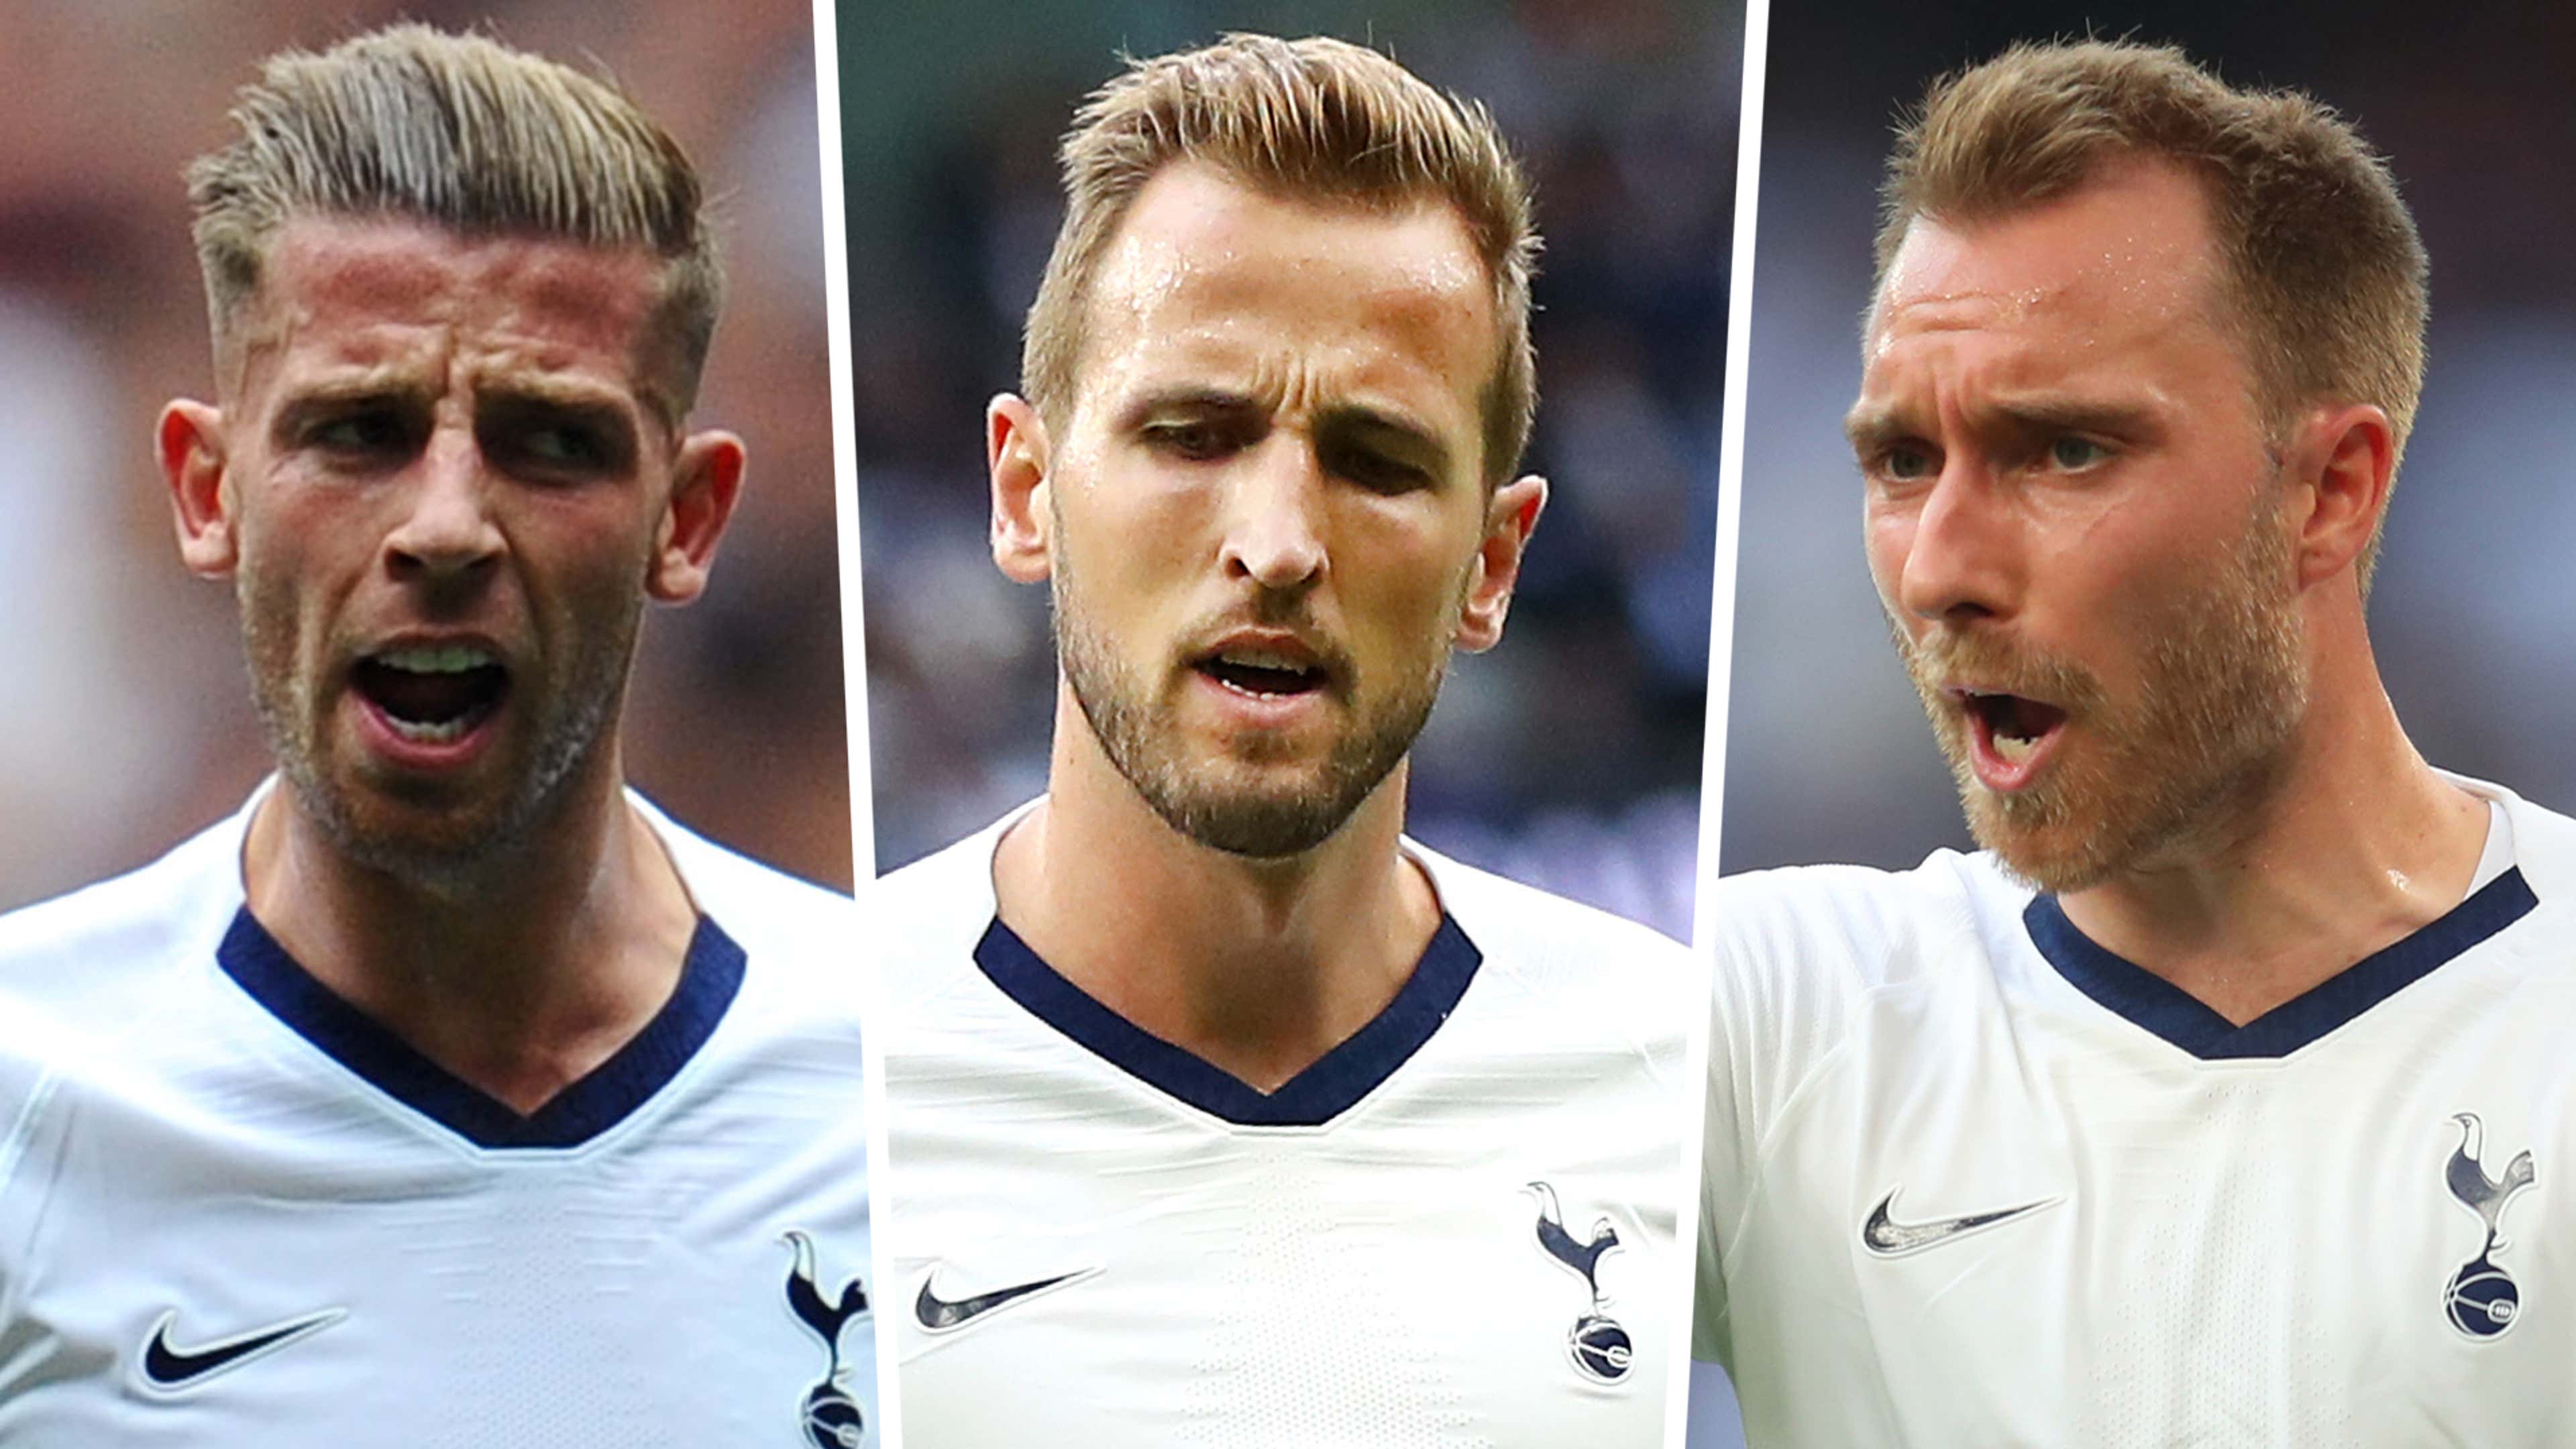 Christian Eriksen and the 8 players who could leave Tottenham in